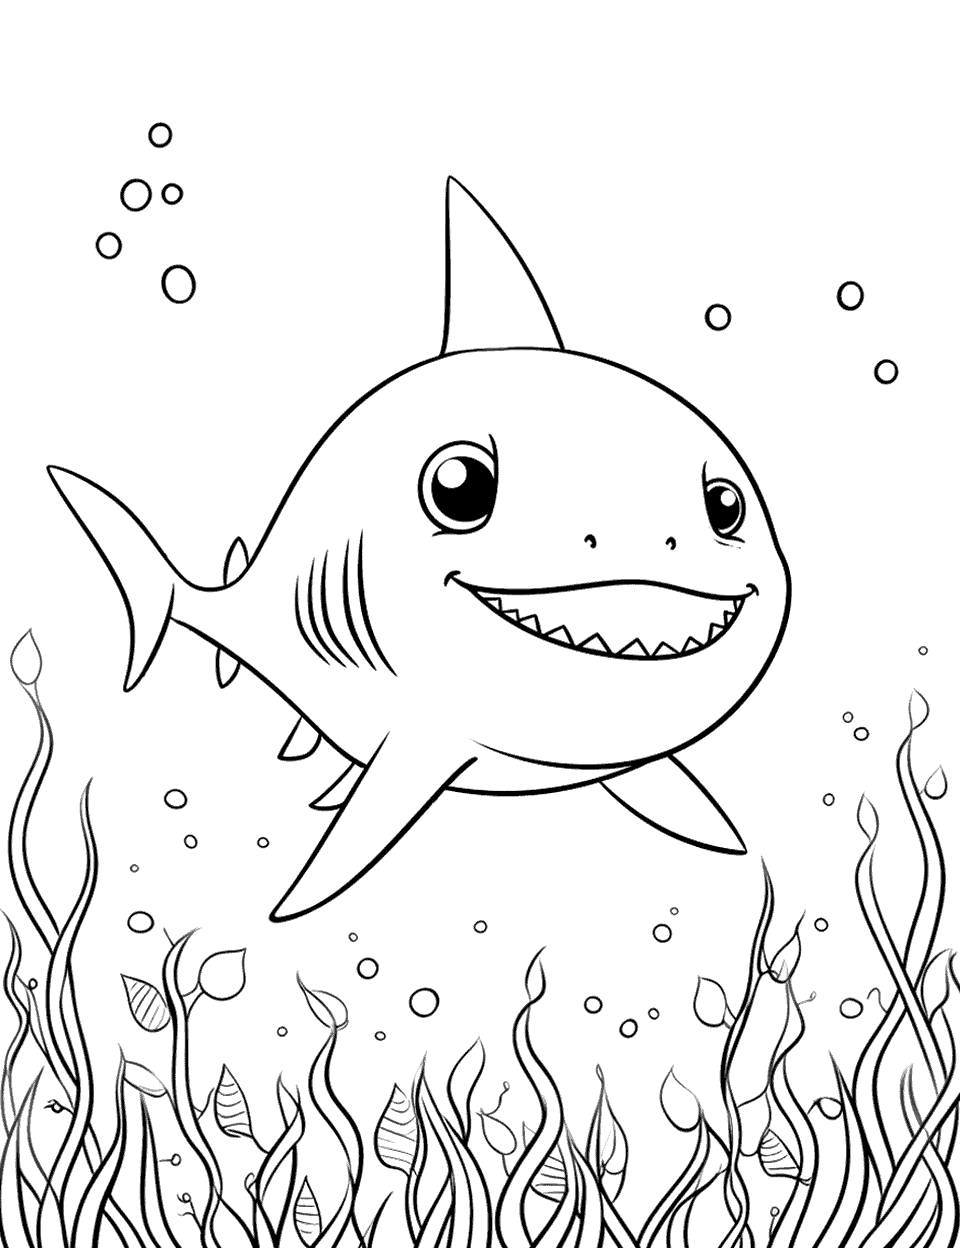 Easter Baby Shark Coloring Page - Baby Shark looking for Easter eggs hidden among the seaweed.